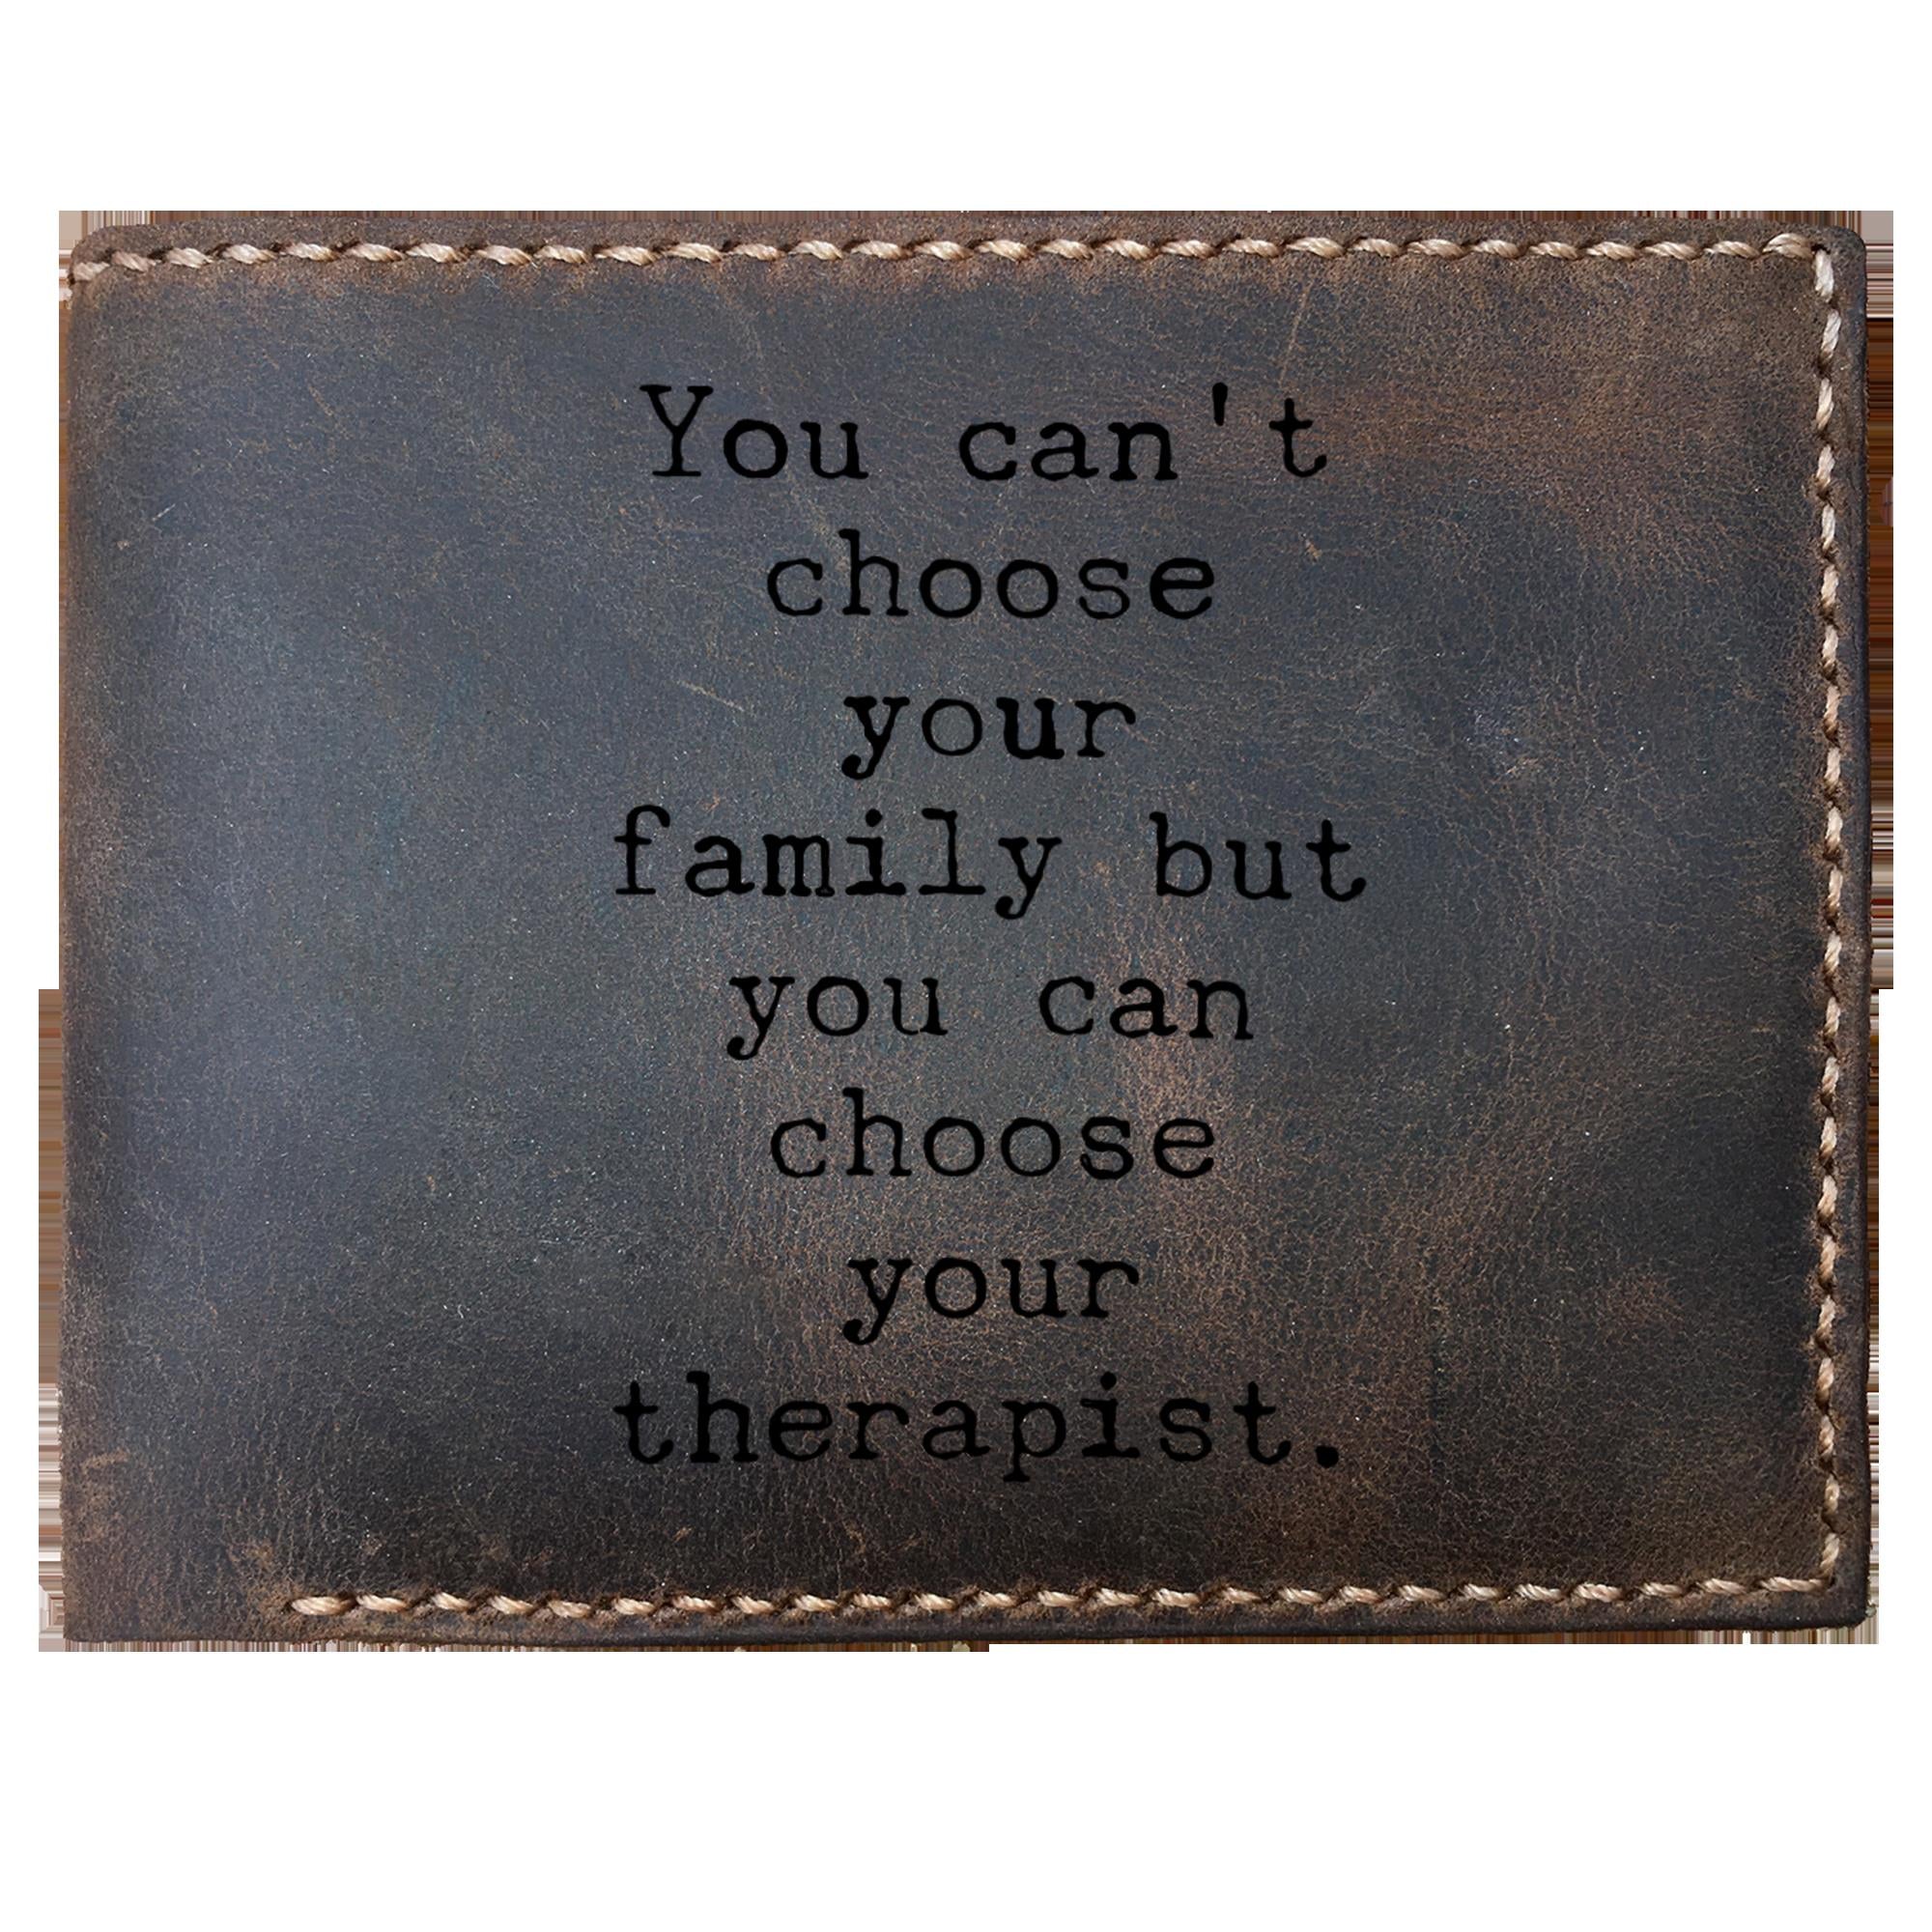 Skitongifts Funny Custom Laser Engraved Bifold Leather Wallet For Men, You Can't Choose Family But Can Choose Therapist